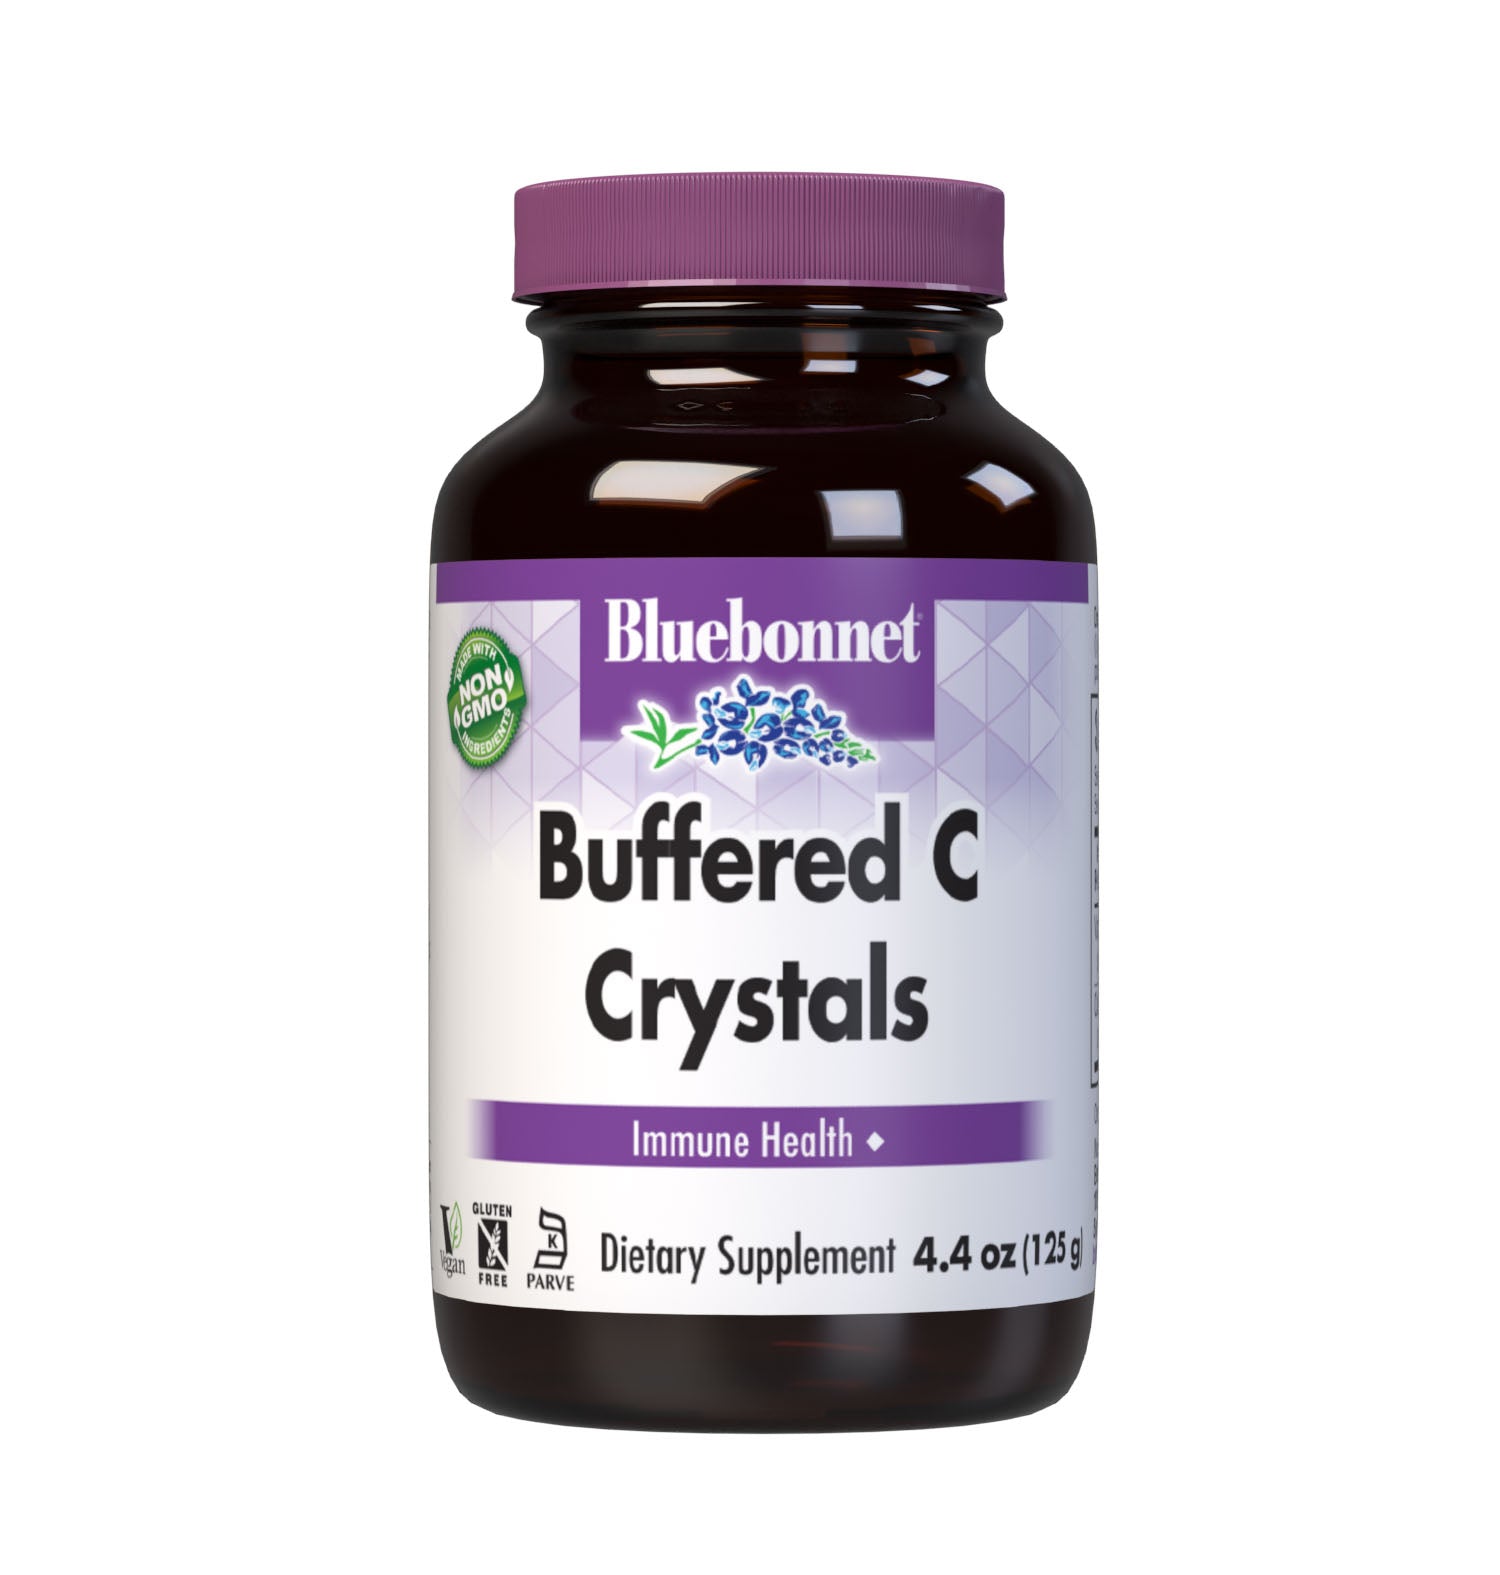 Bluebonnet’s Buffered C Crystals are formulated with buffered vitamin C from calcium ascorbate in its crystalline form to help support immune function. Calcium ascorbate is an excellent source of vitamin C for individuals who are sensitive to L-ascorbic acid, as well as calcium. #size_4.4oz